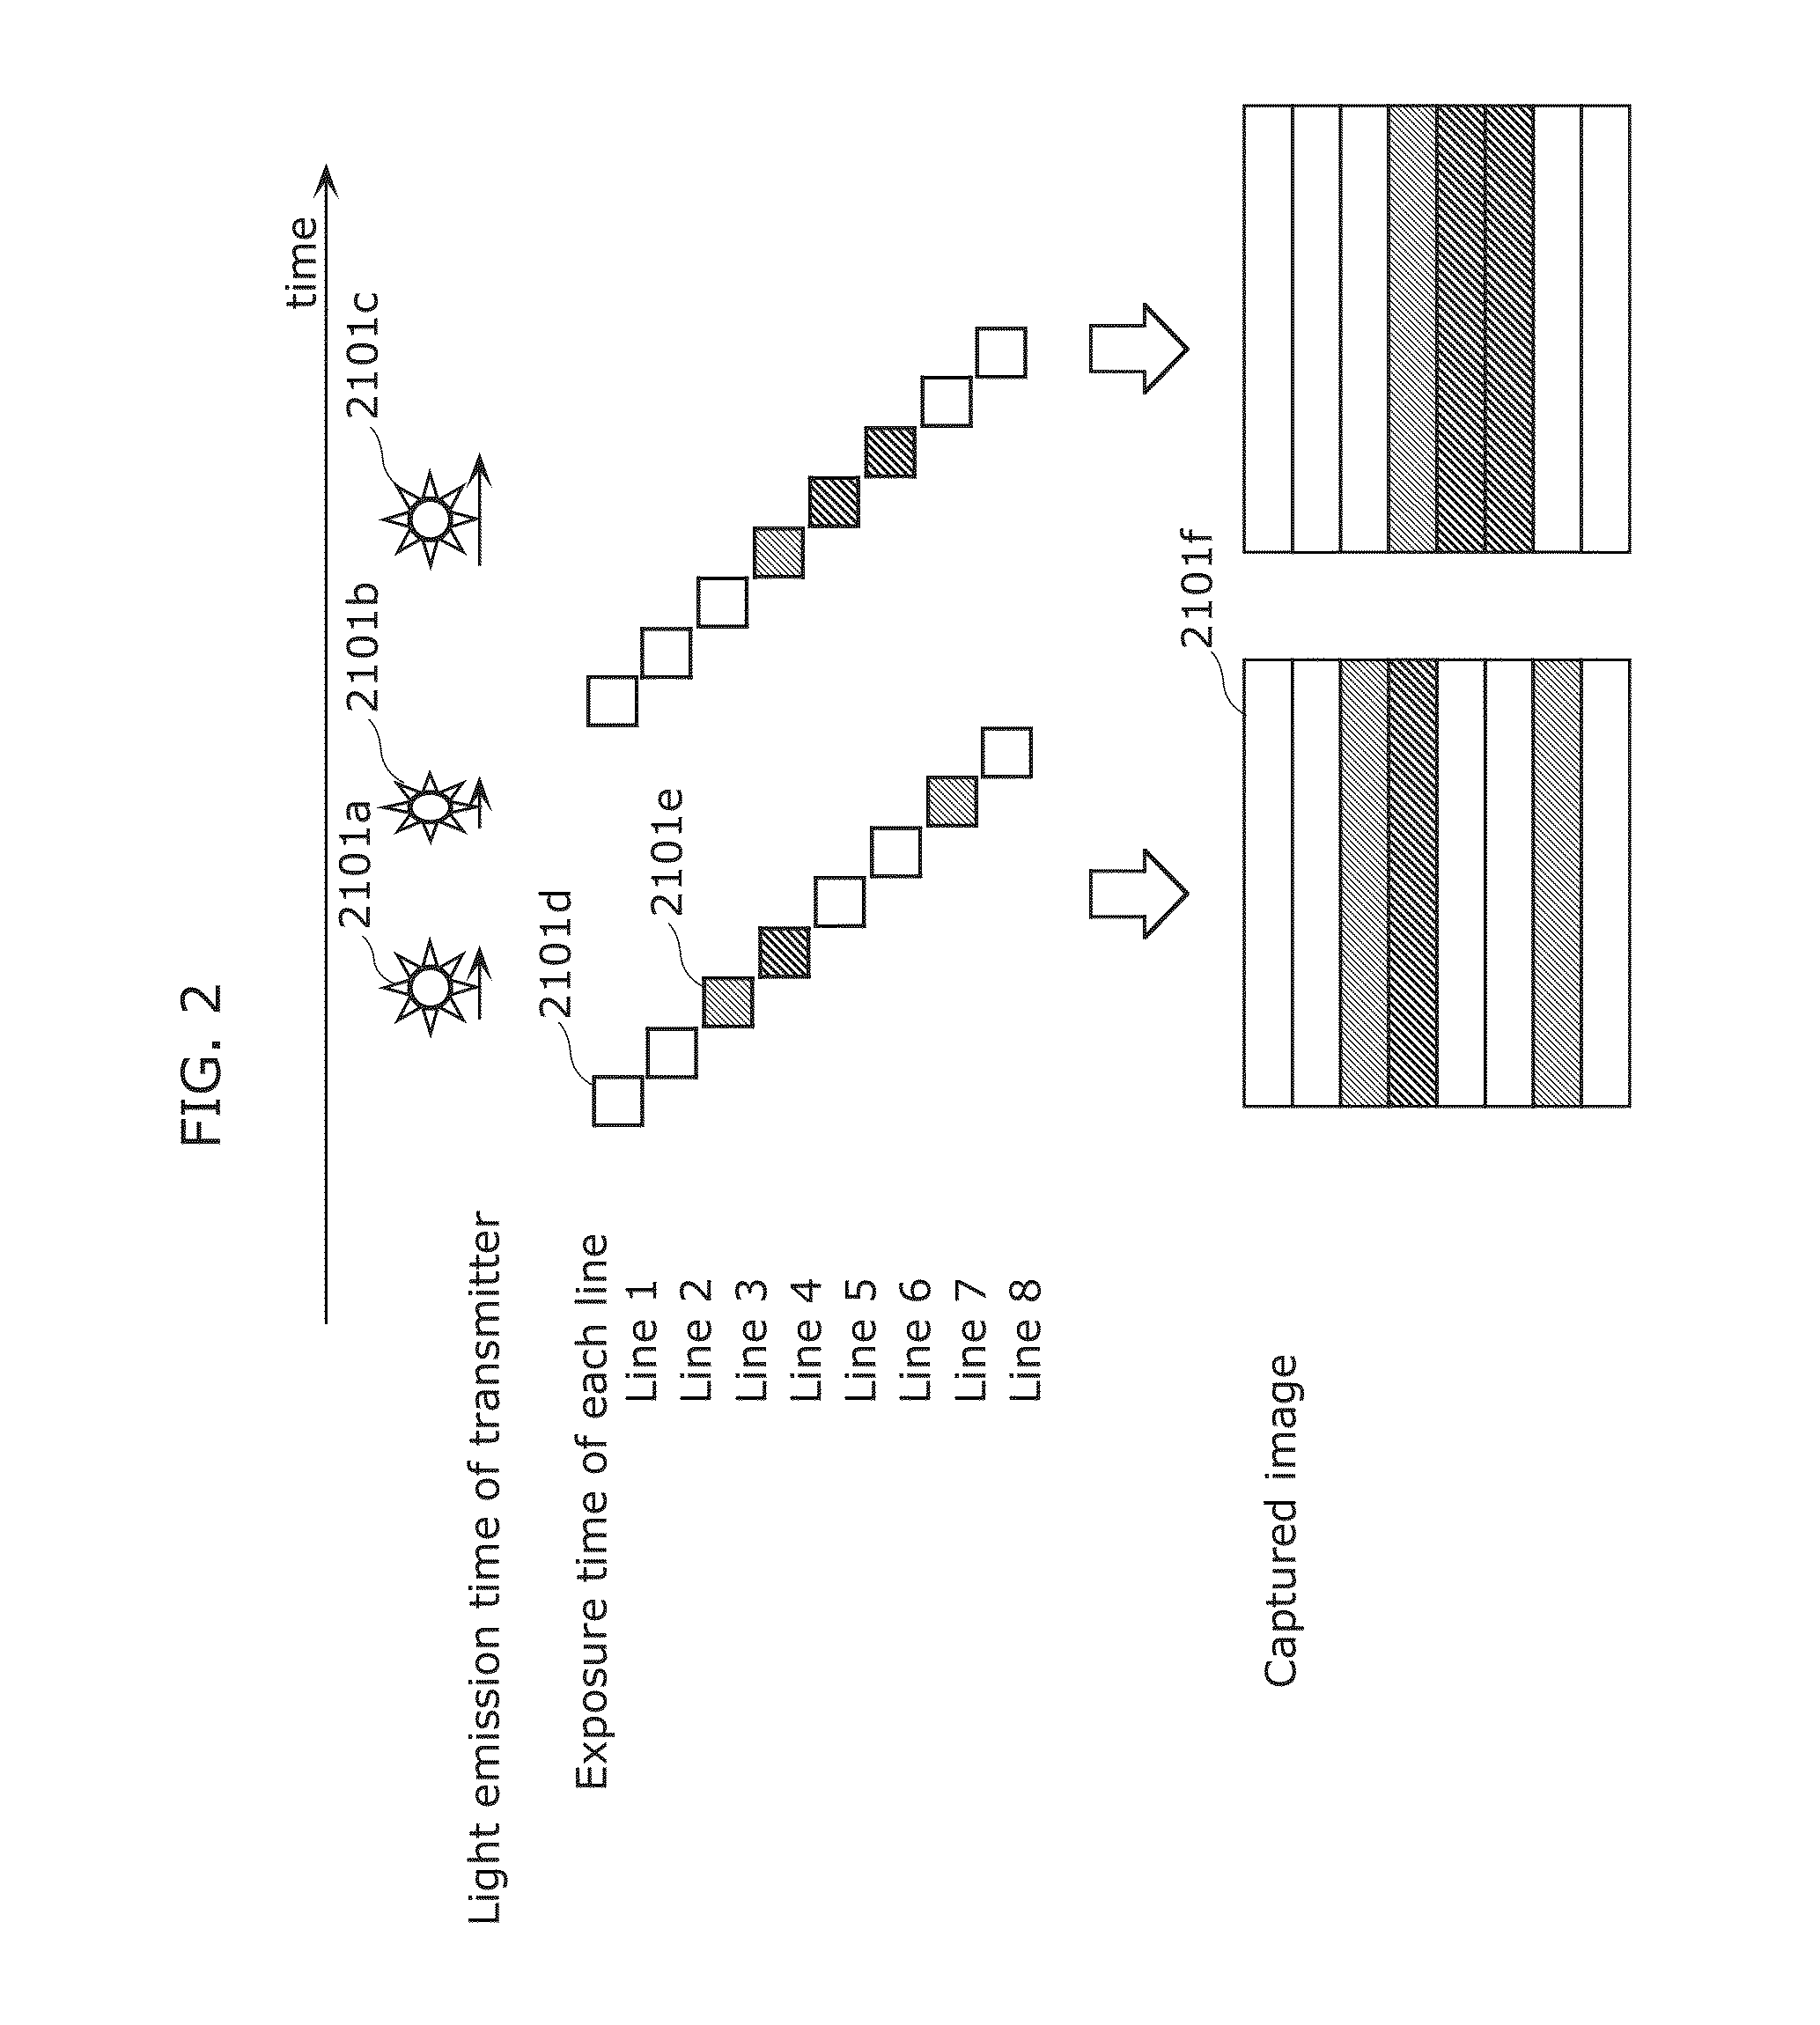 Information processing method for generating encoded signal for visible light communication